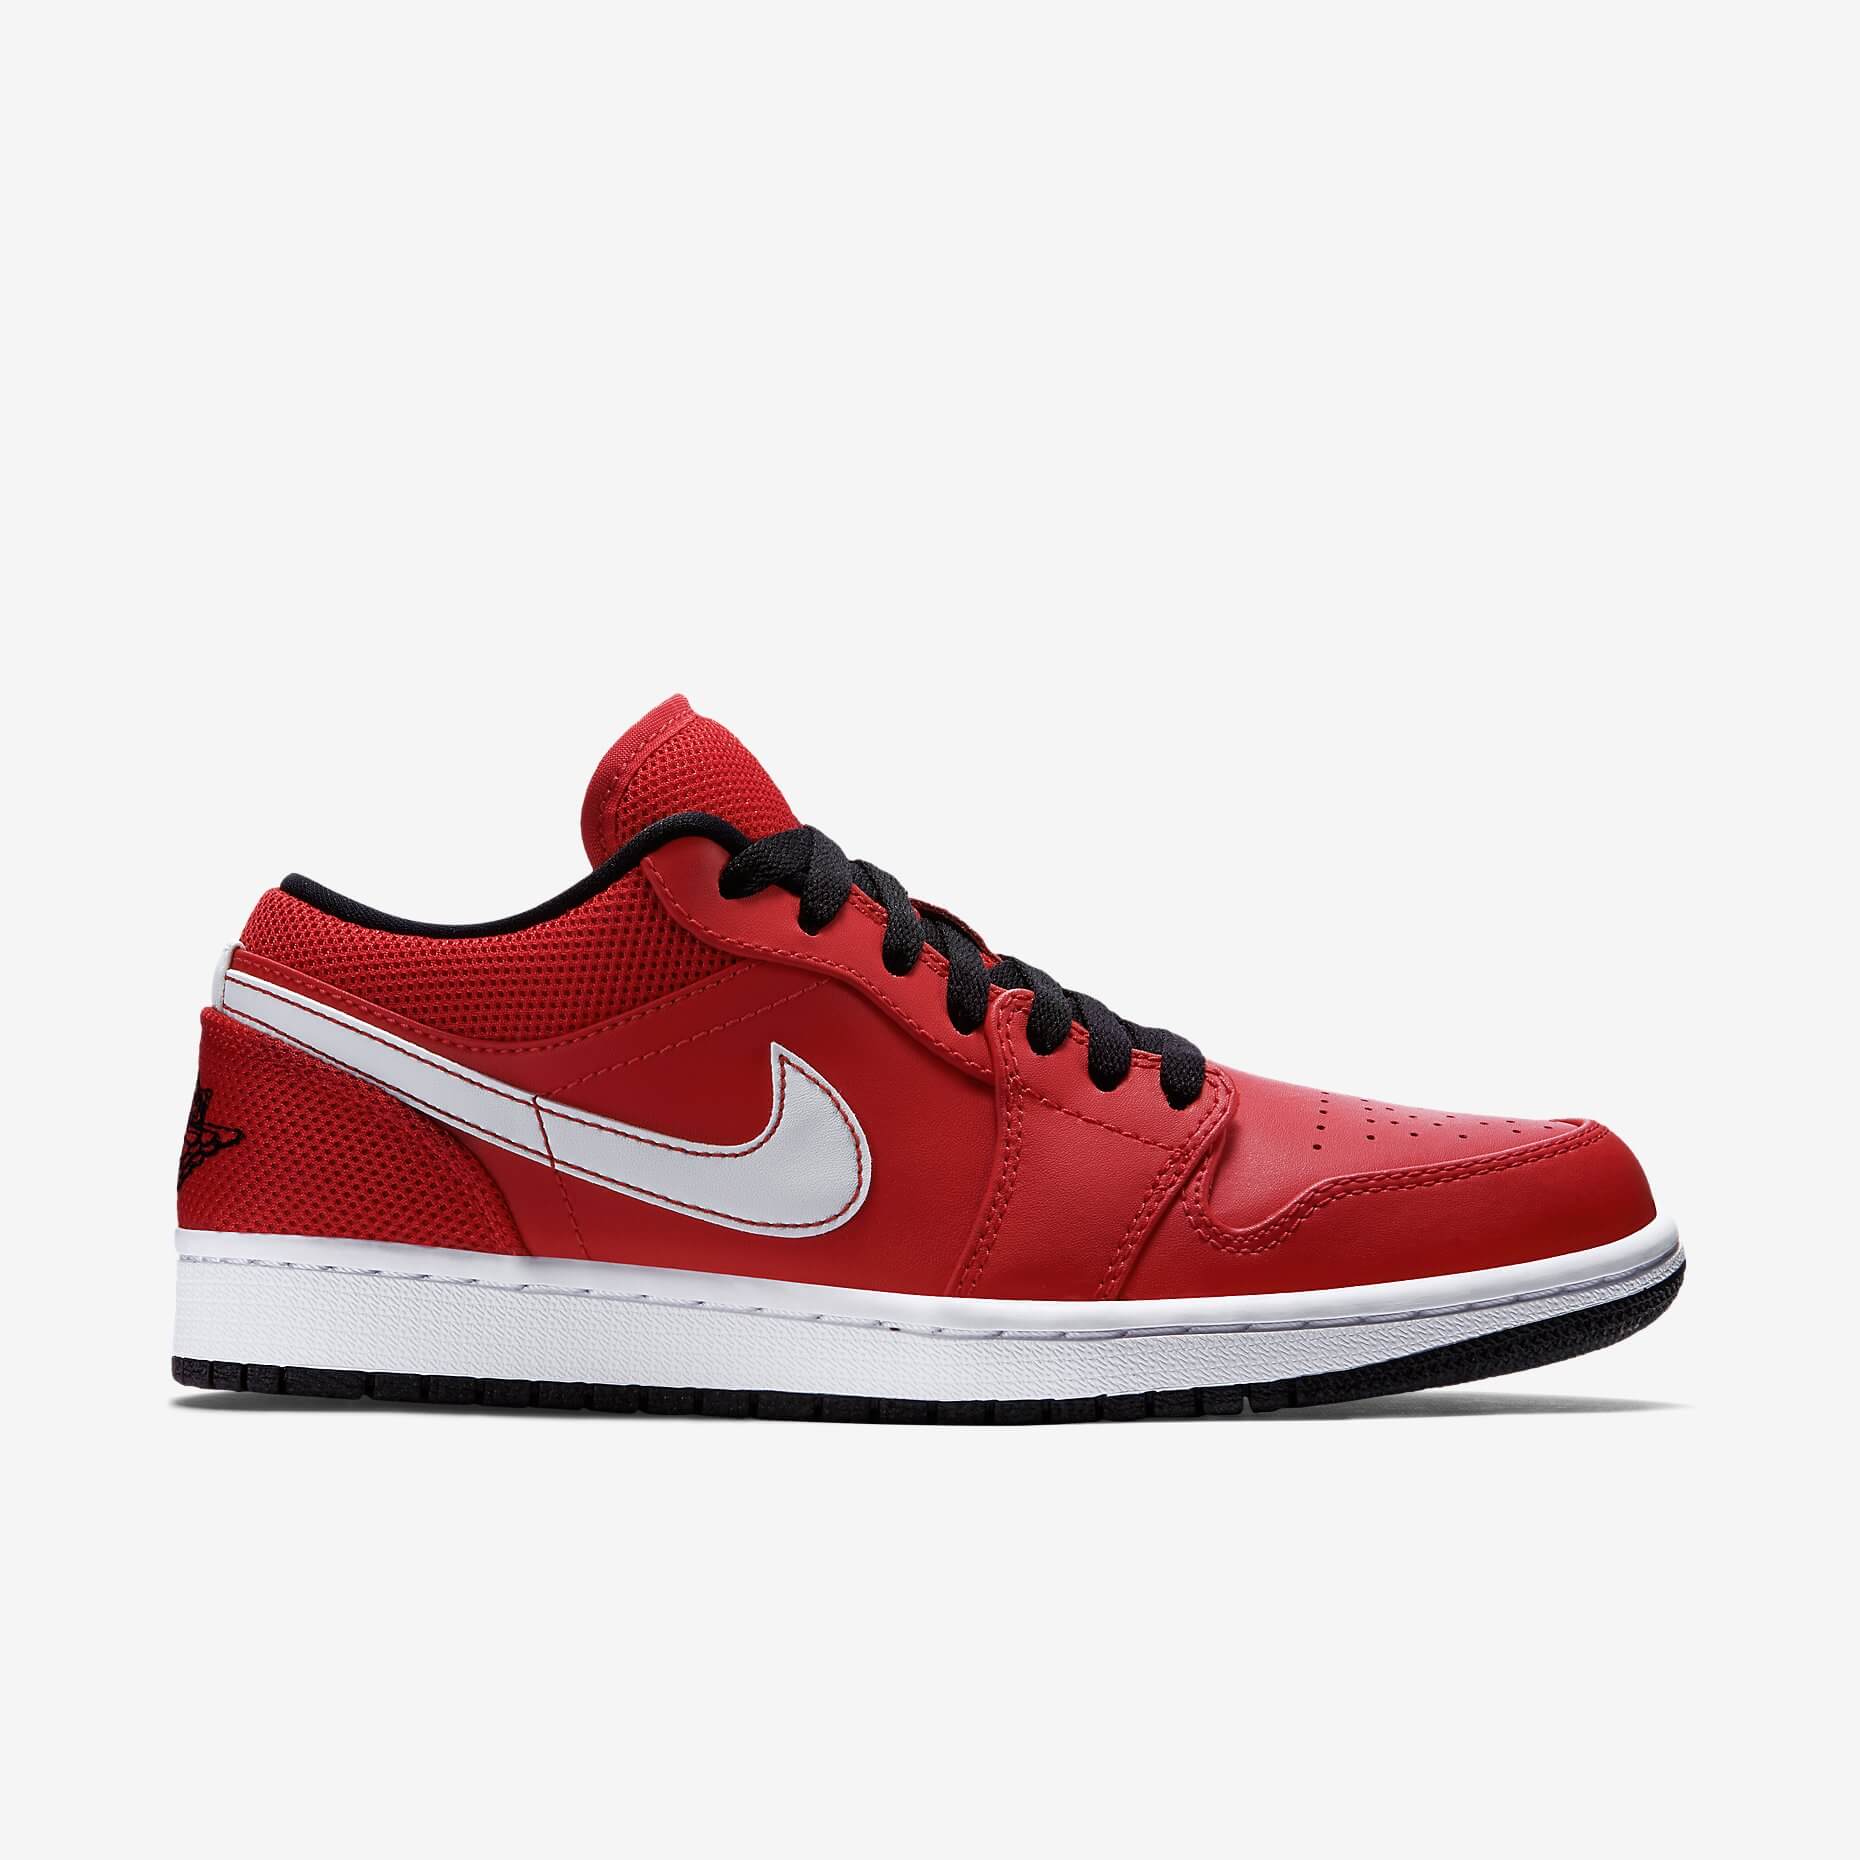 Nike Air Jordan 1 Low University Red Where To Buy 600 The Sole Supplier